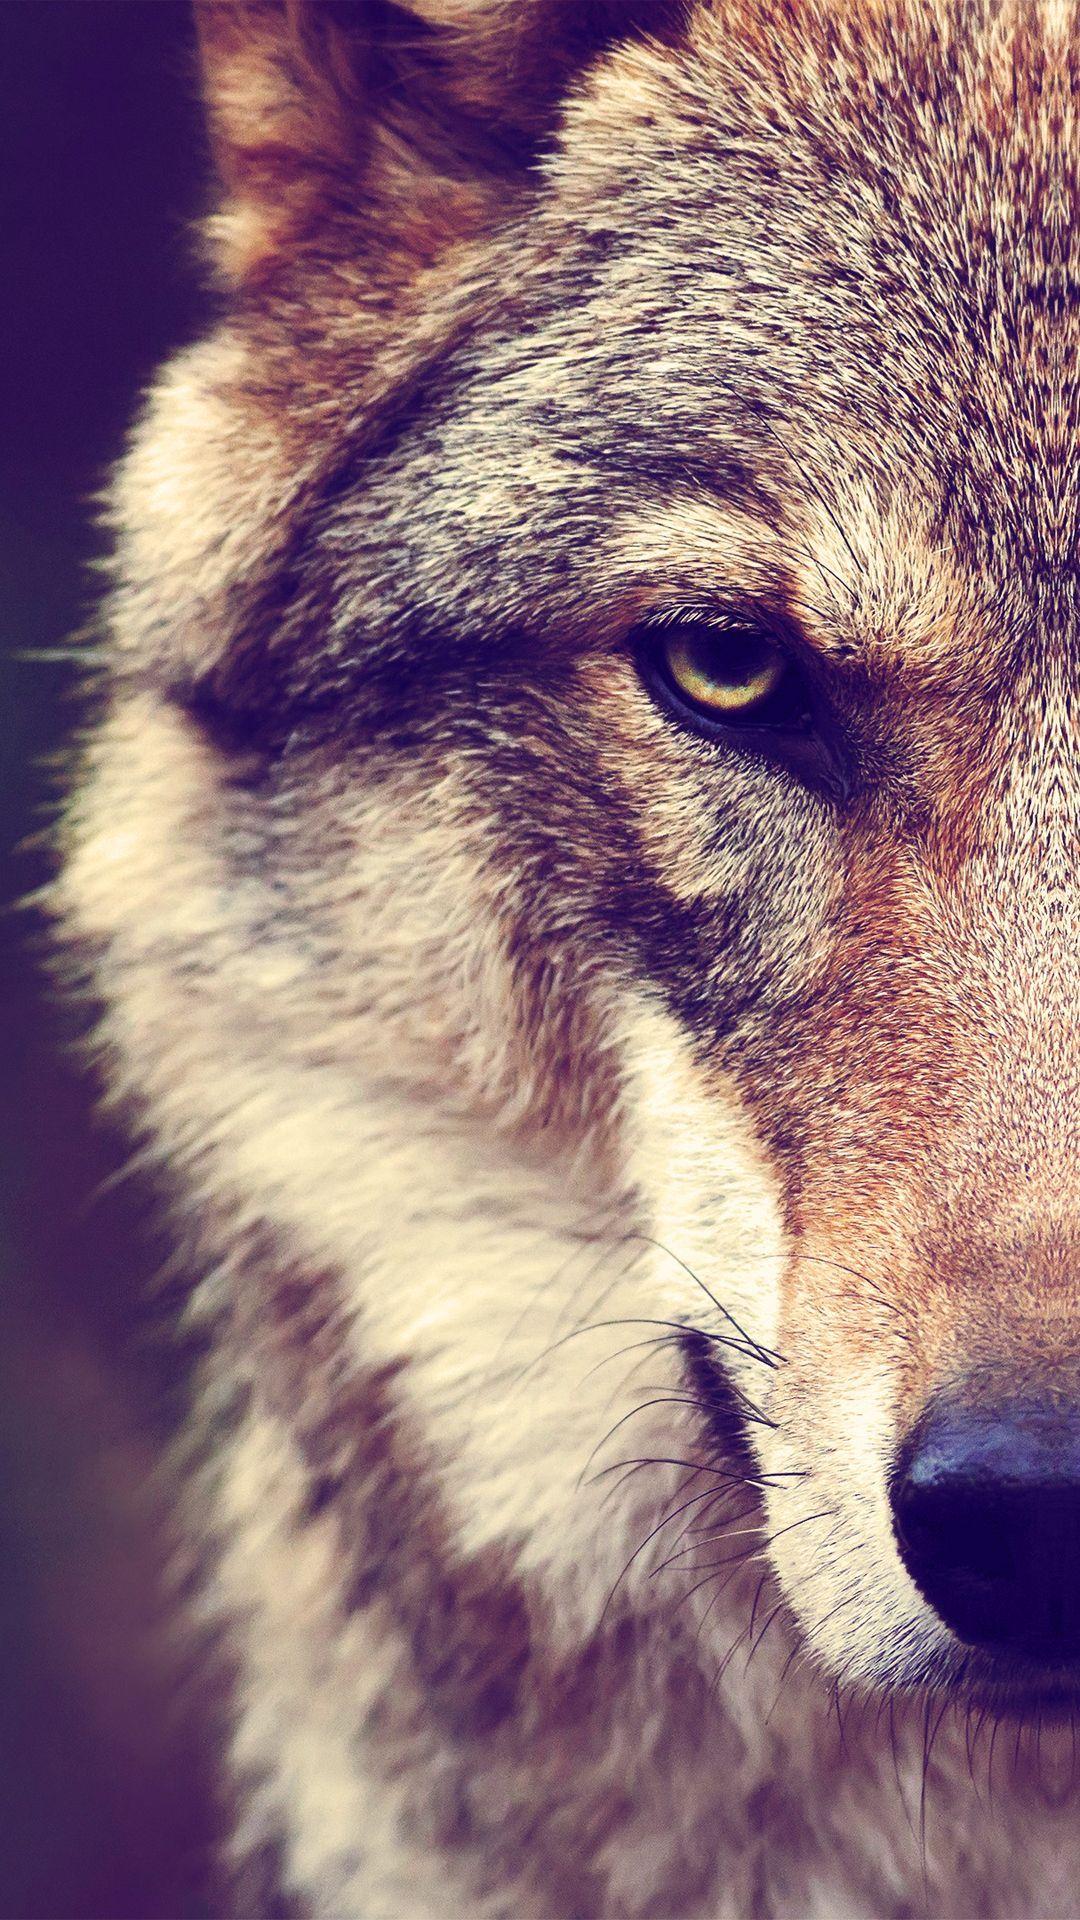 Wolf Powers IPhone Wallpaper HD  IPhone Wallpapers  iPhone Wallpapers